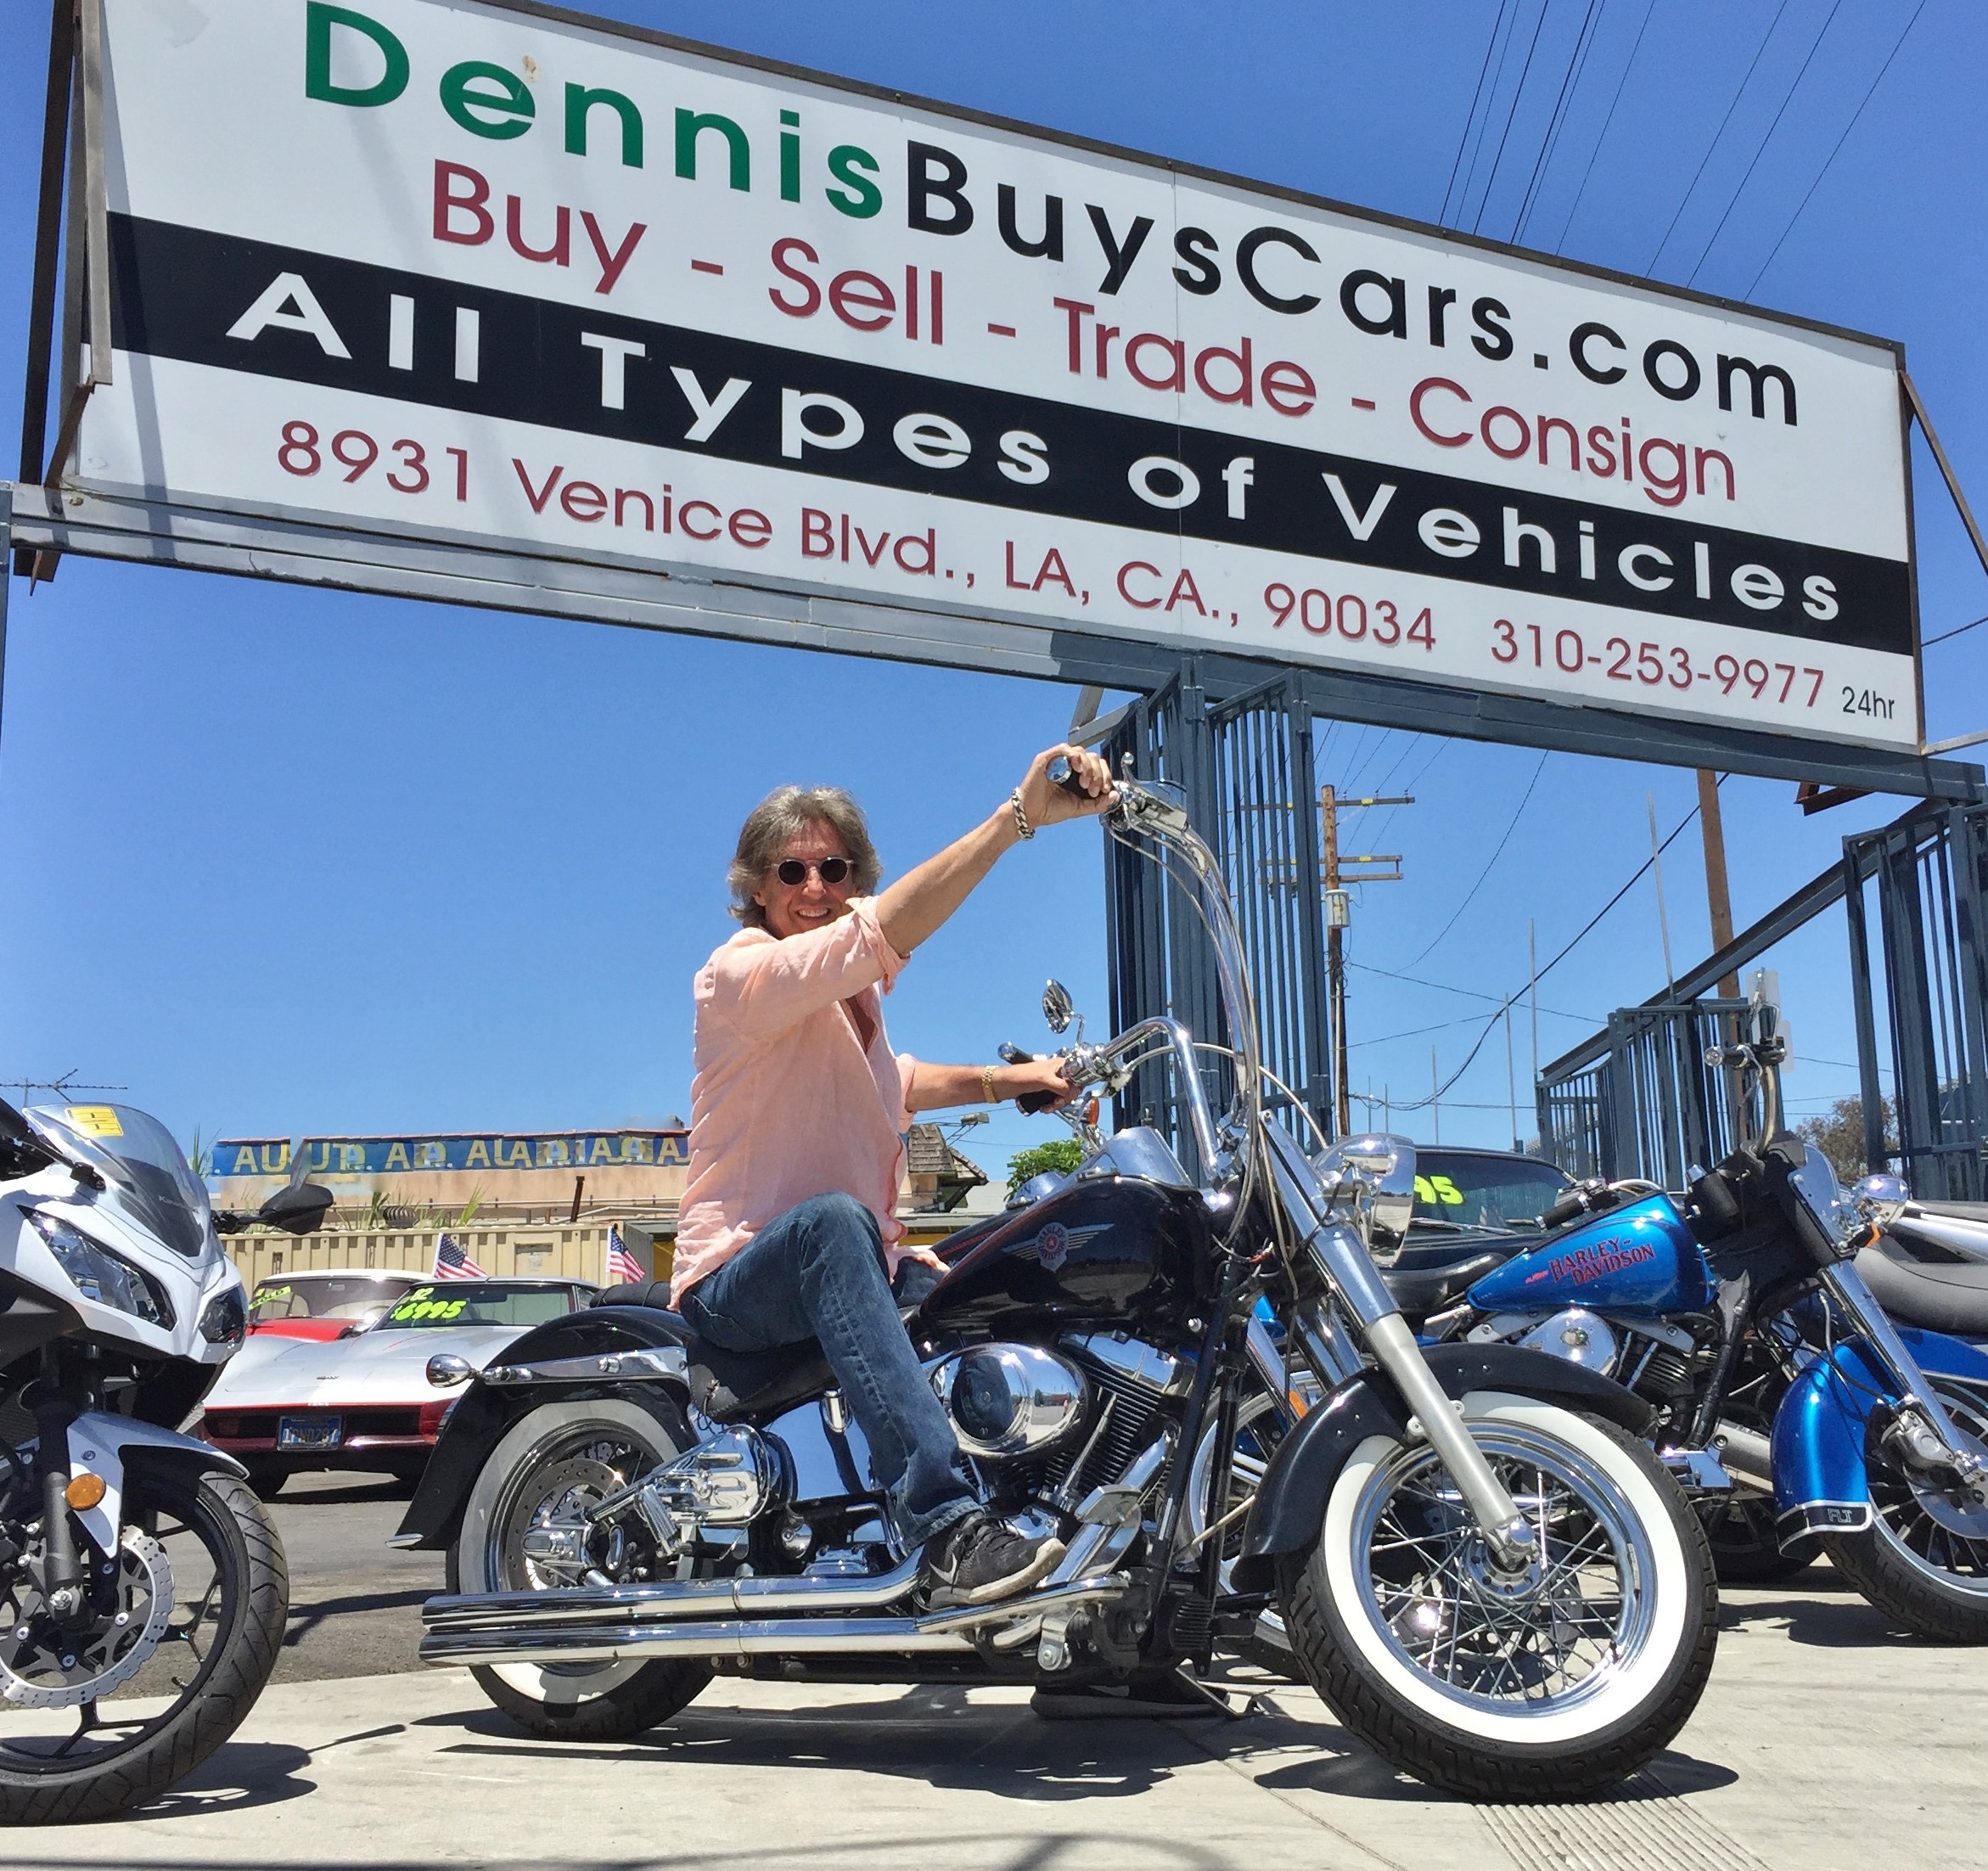 Get the Most Cash for Your Old Harley at Dennis Buys Cars in Los Angeles